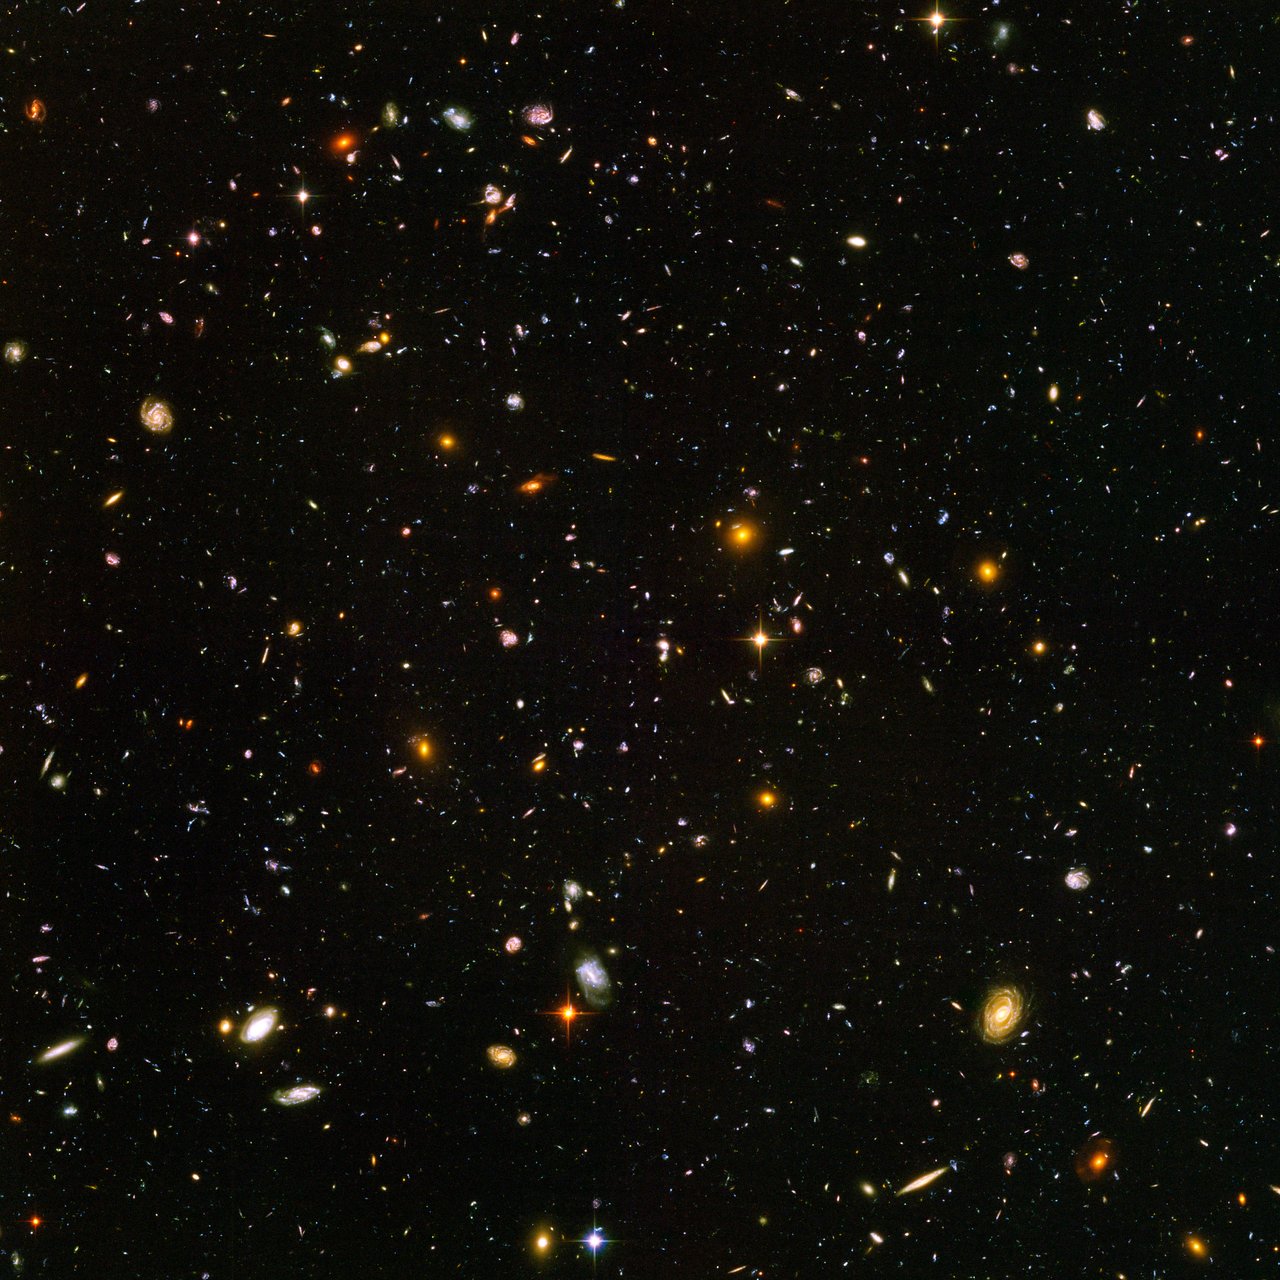 Огляд&amp;nbsp;Hubble Deep Field.&amp;nbsp;NASA,&amp;nbsp;ESA, and S. Beckwith (STScI) and the HUDF Team  